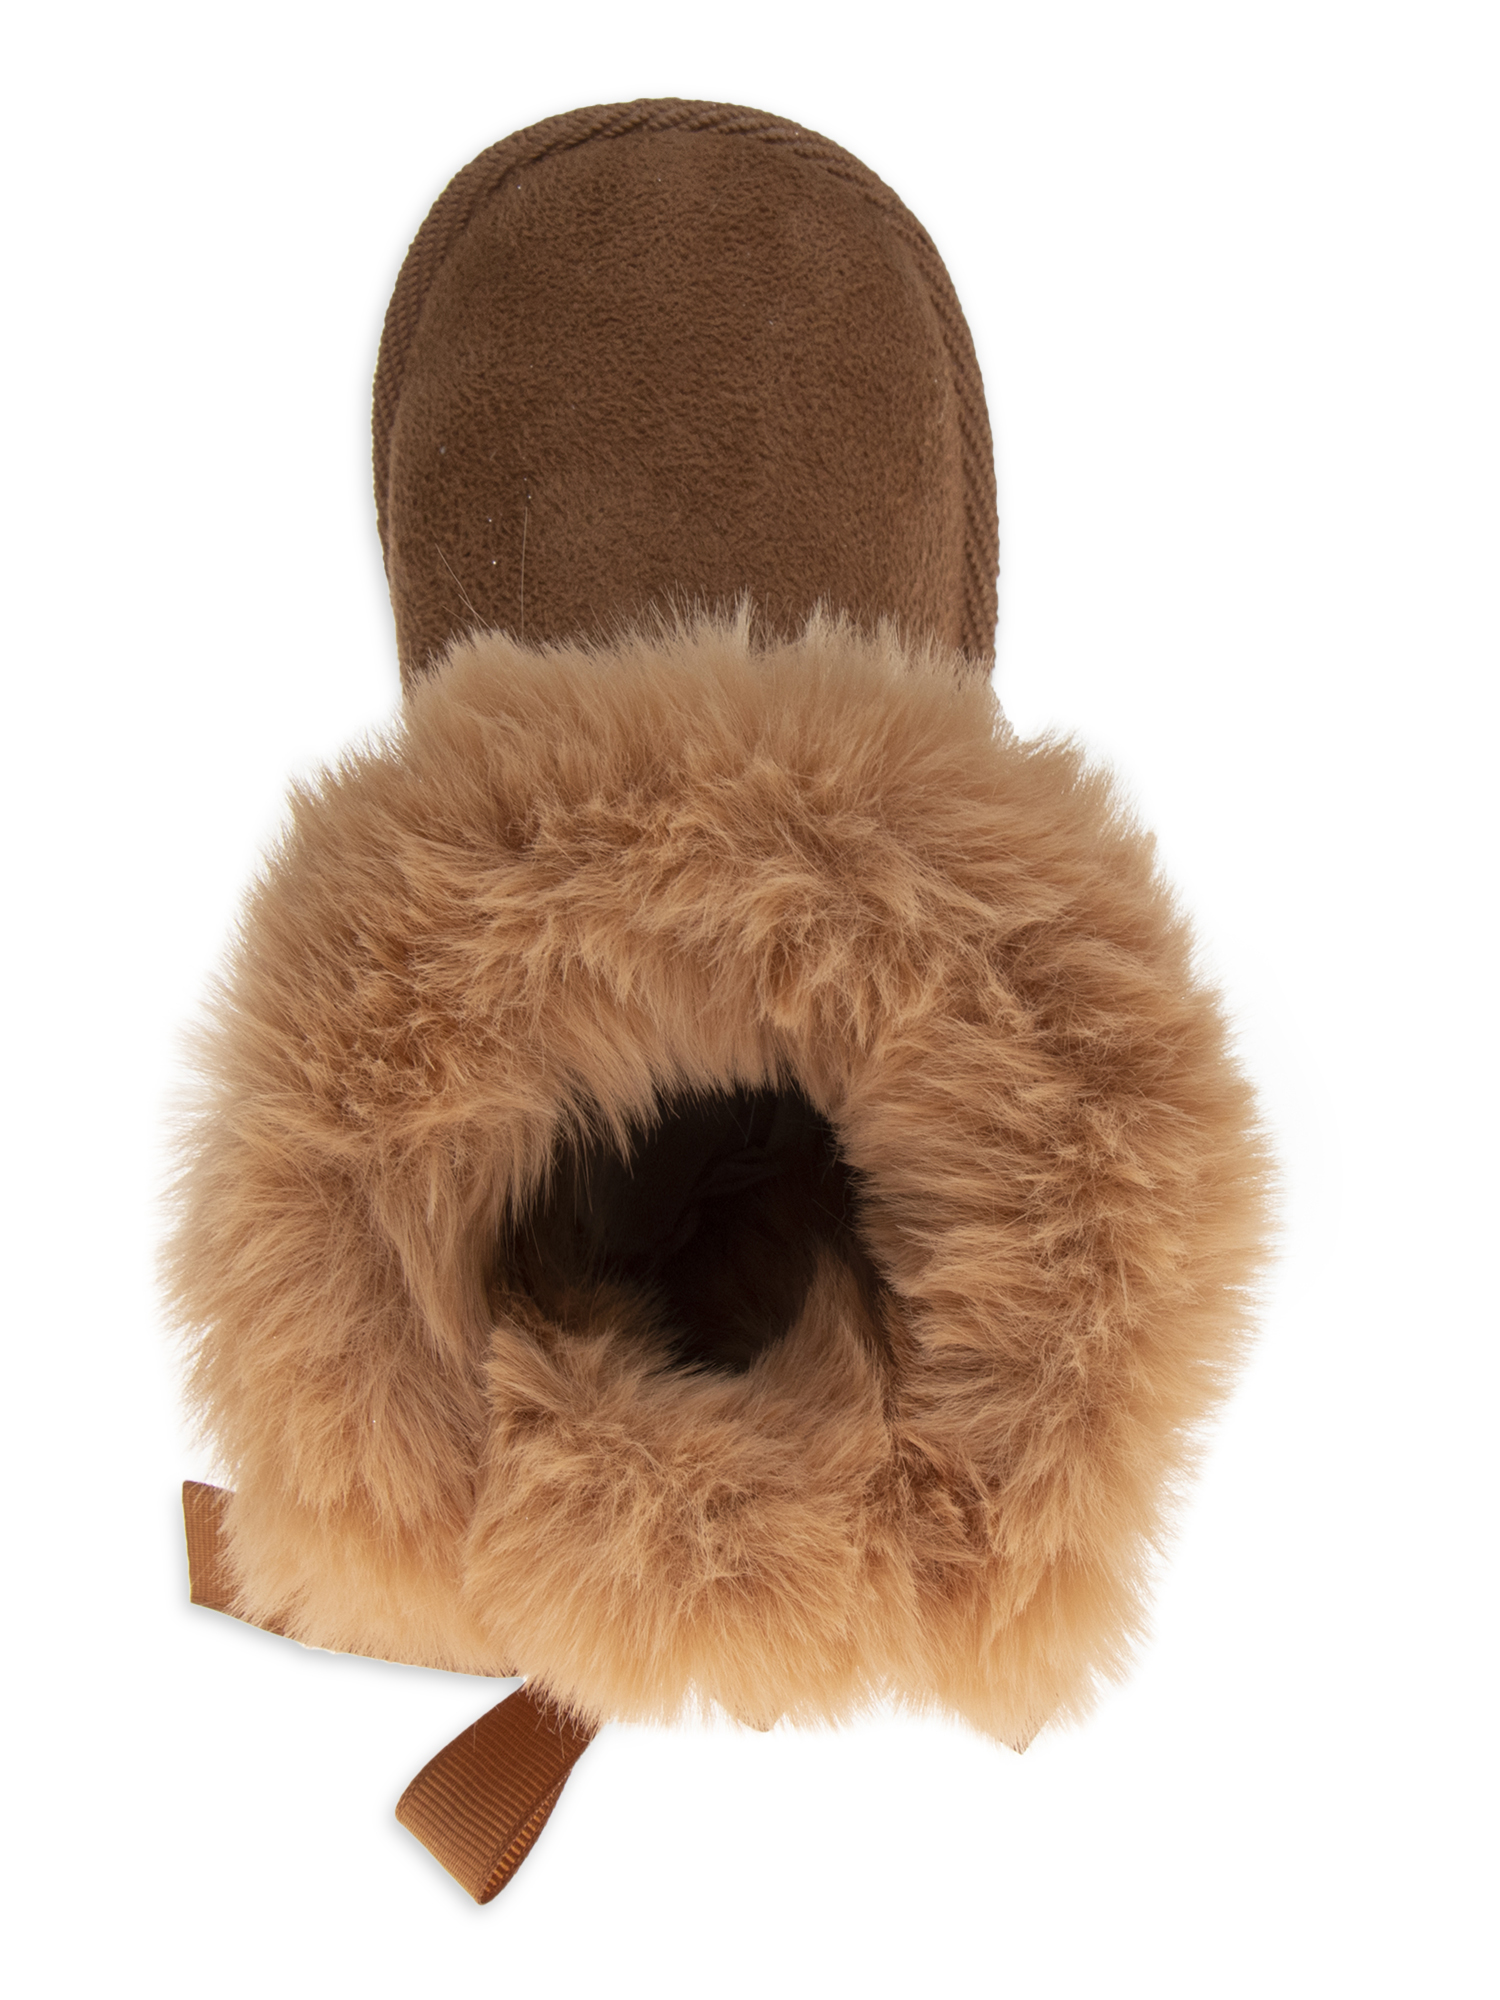 Josmo Toddler & Big Girls Faux Shearling Bow Boots - image 4 of 5